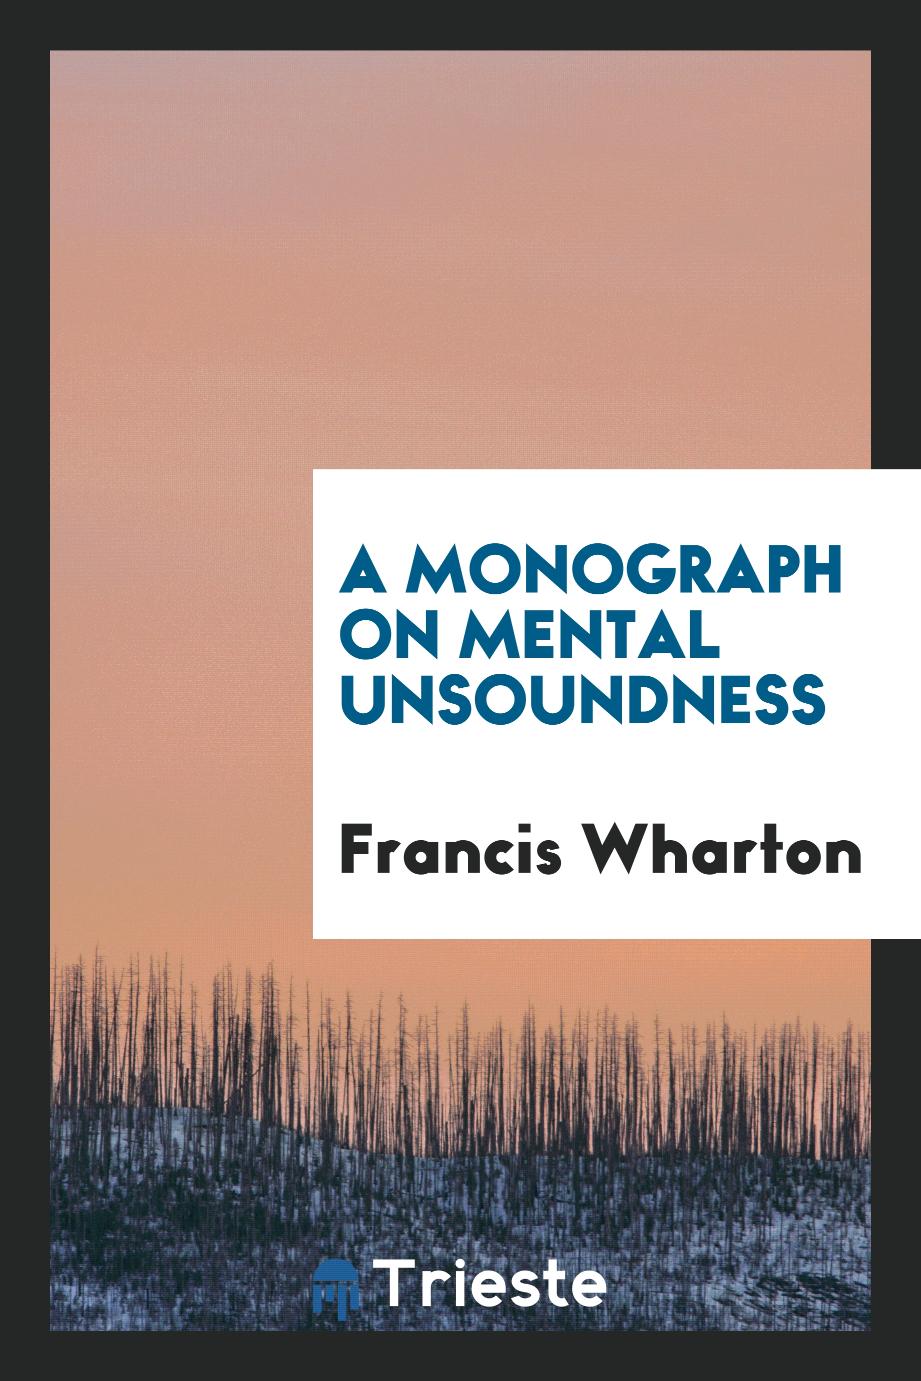 A Monograph on Mental Unsoundness